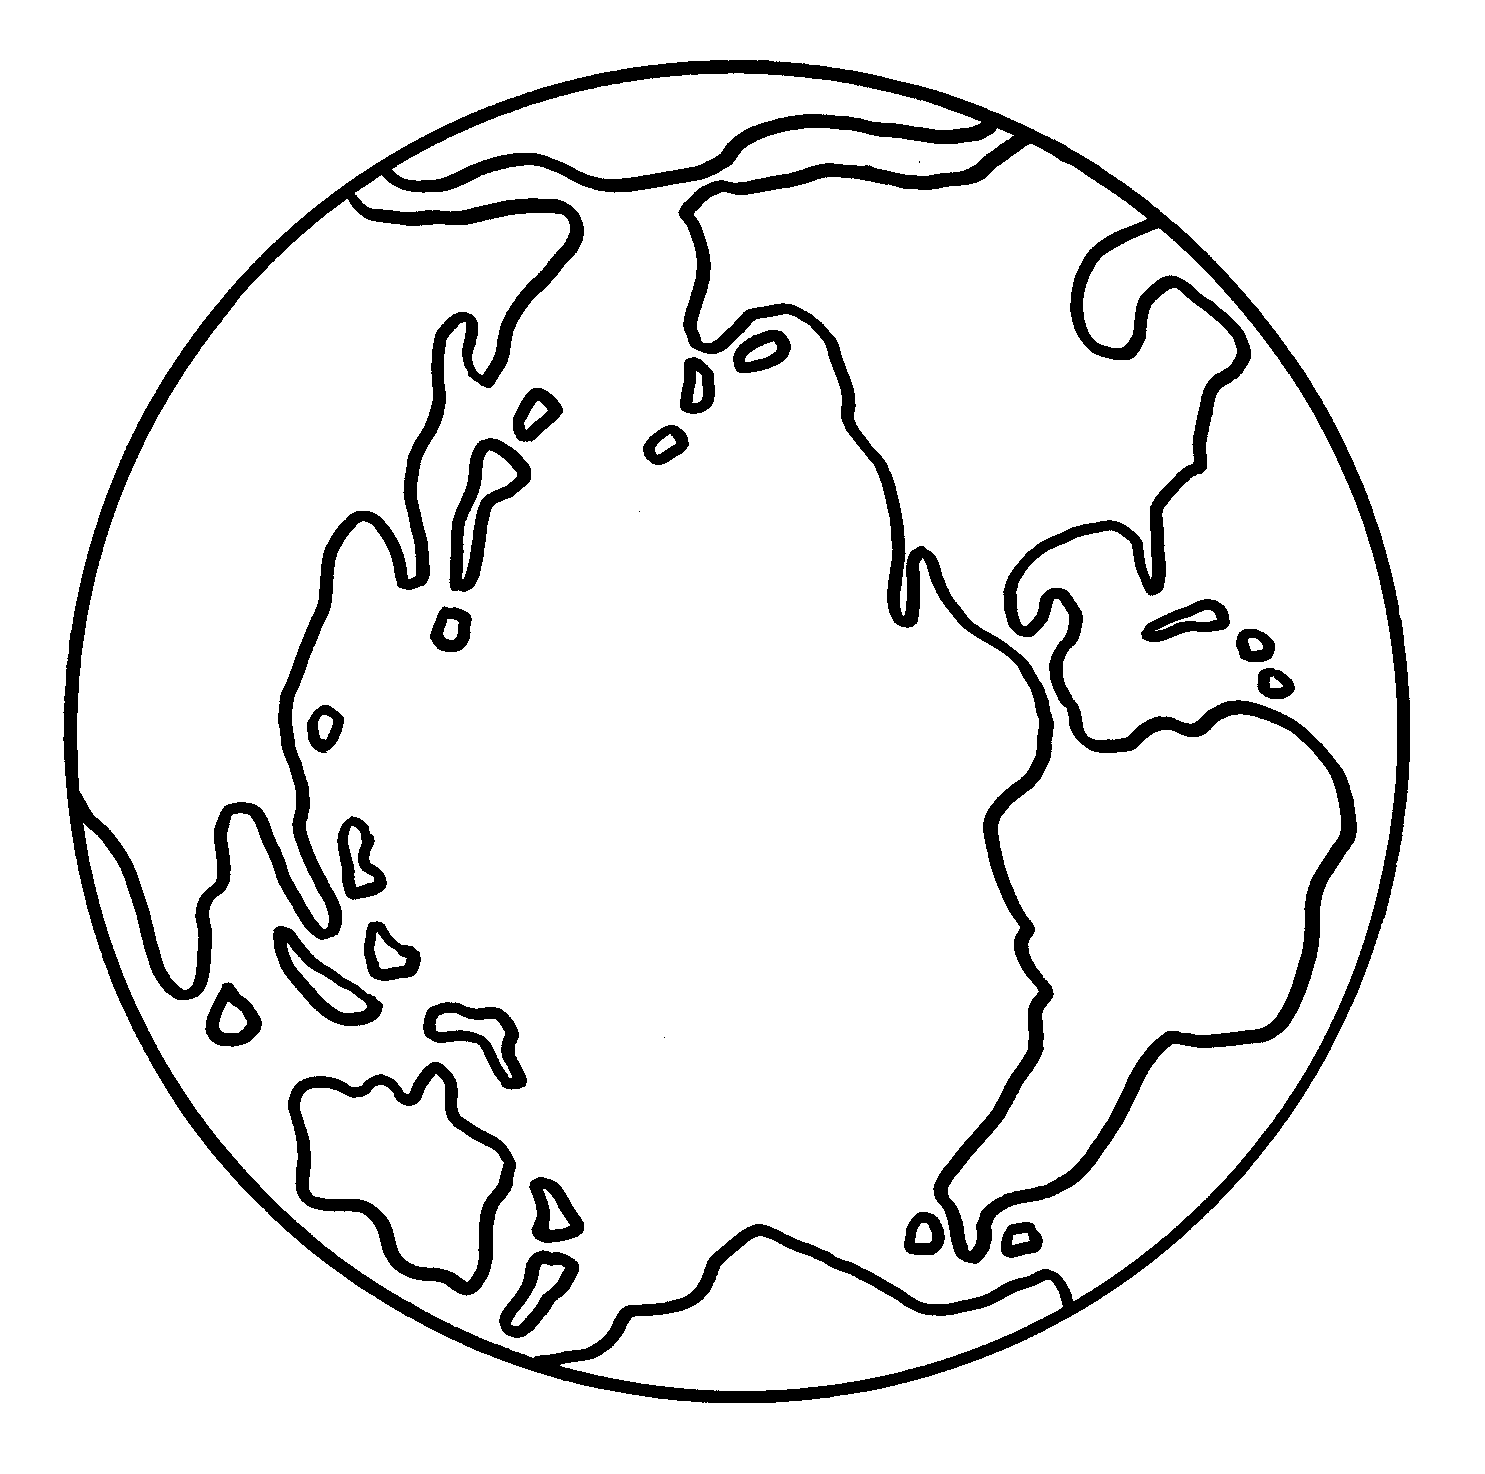 Coloring Page - Earth